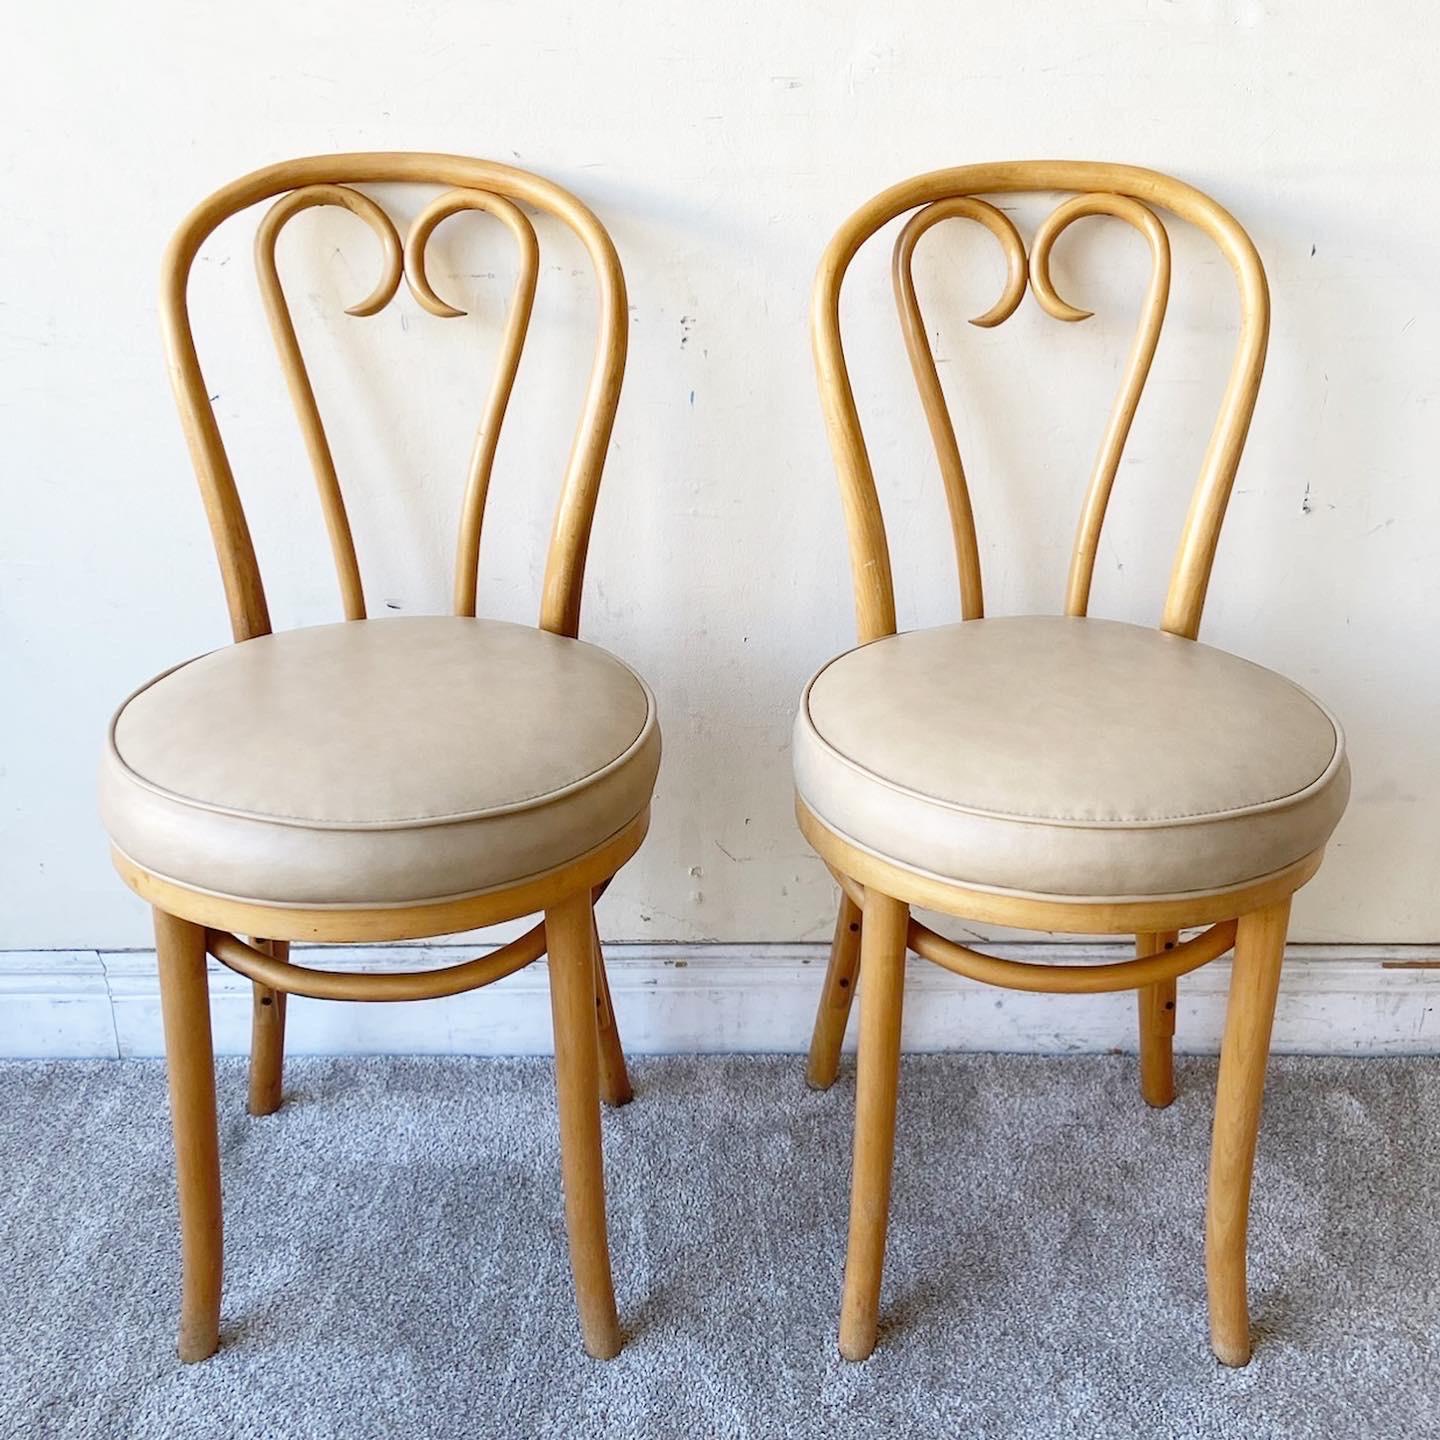 Vintage bentwood cafe Bistro dining chairs - Set of 4. Set includes (4) chairs, round seats with fan vinyl upholstery, original label, great style and form.